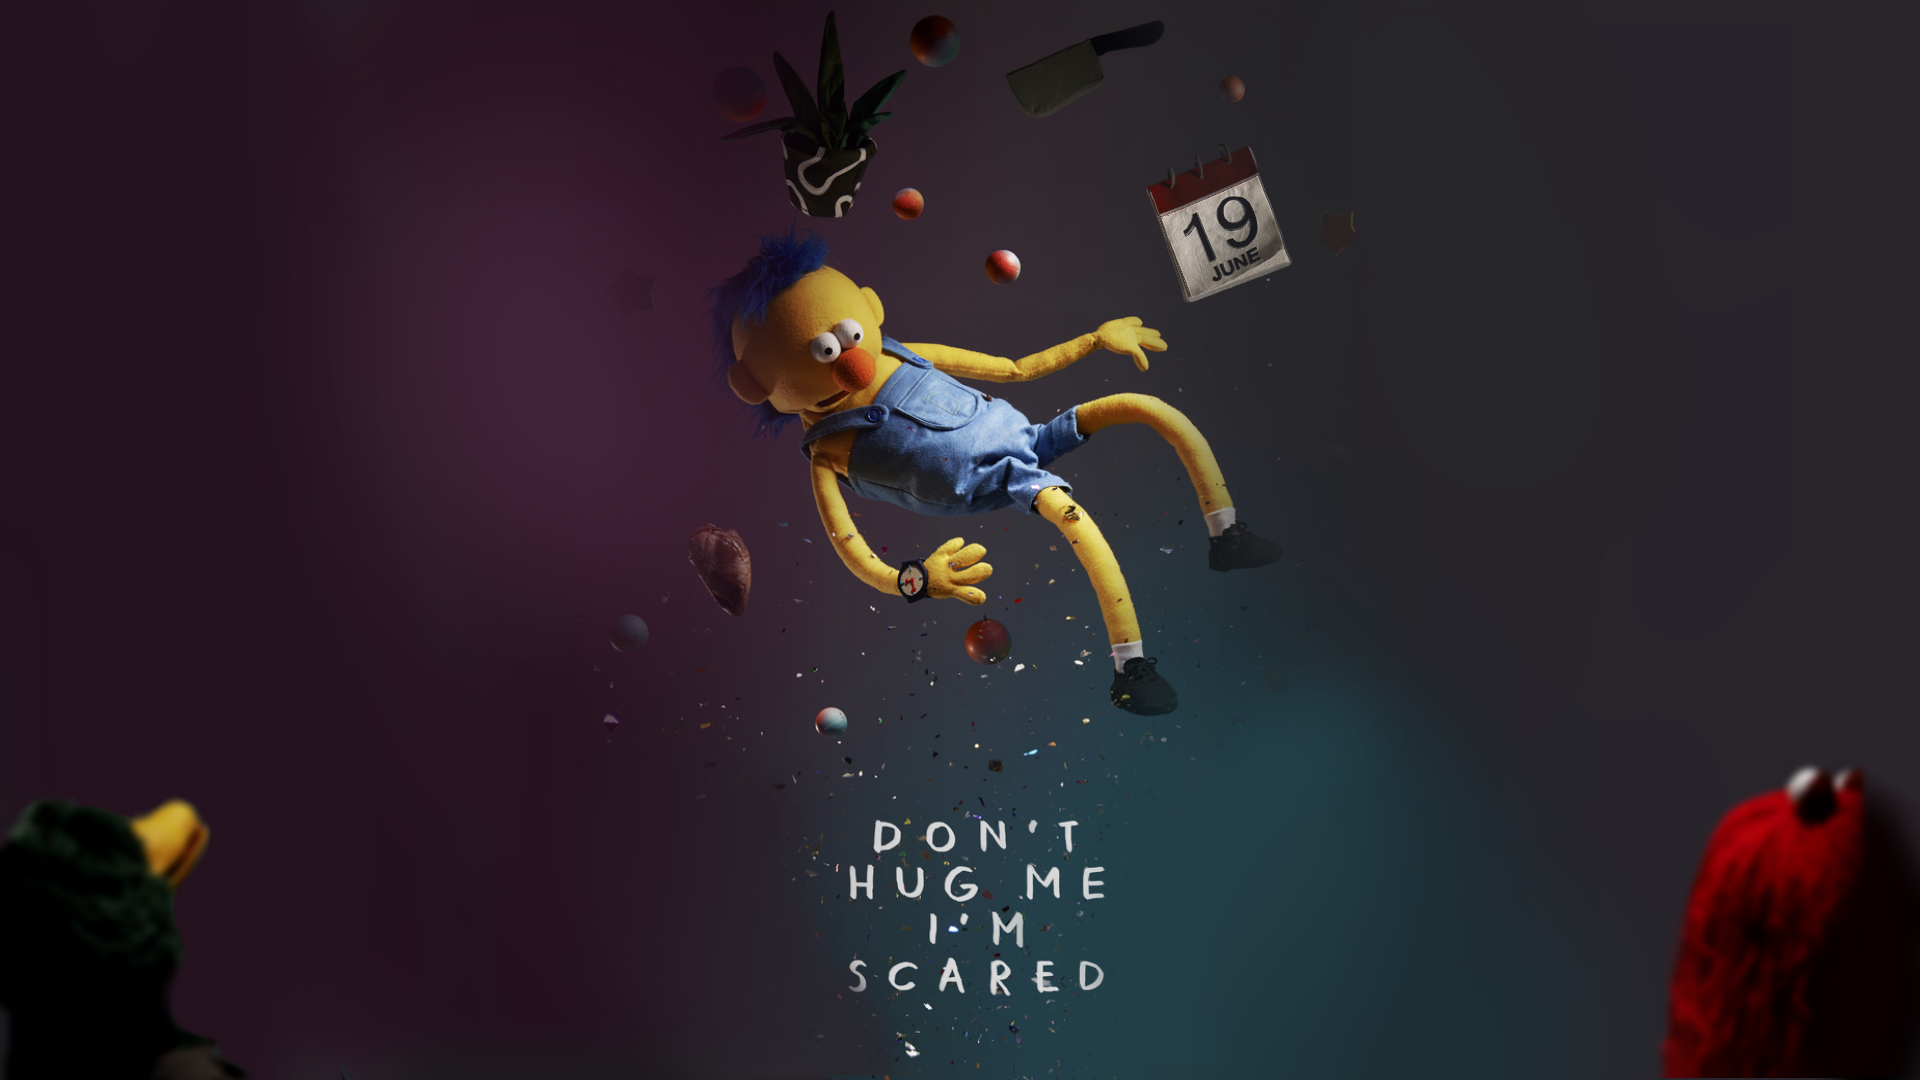 Don T Hug Me I M Scared HD Pc Wallpaper By Gravitypro